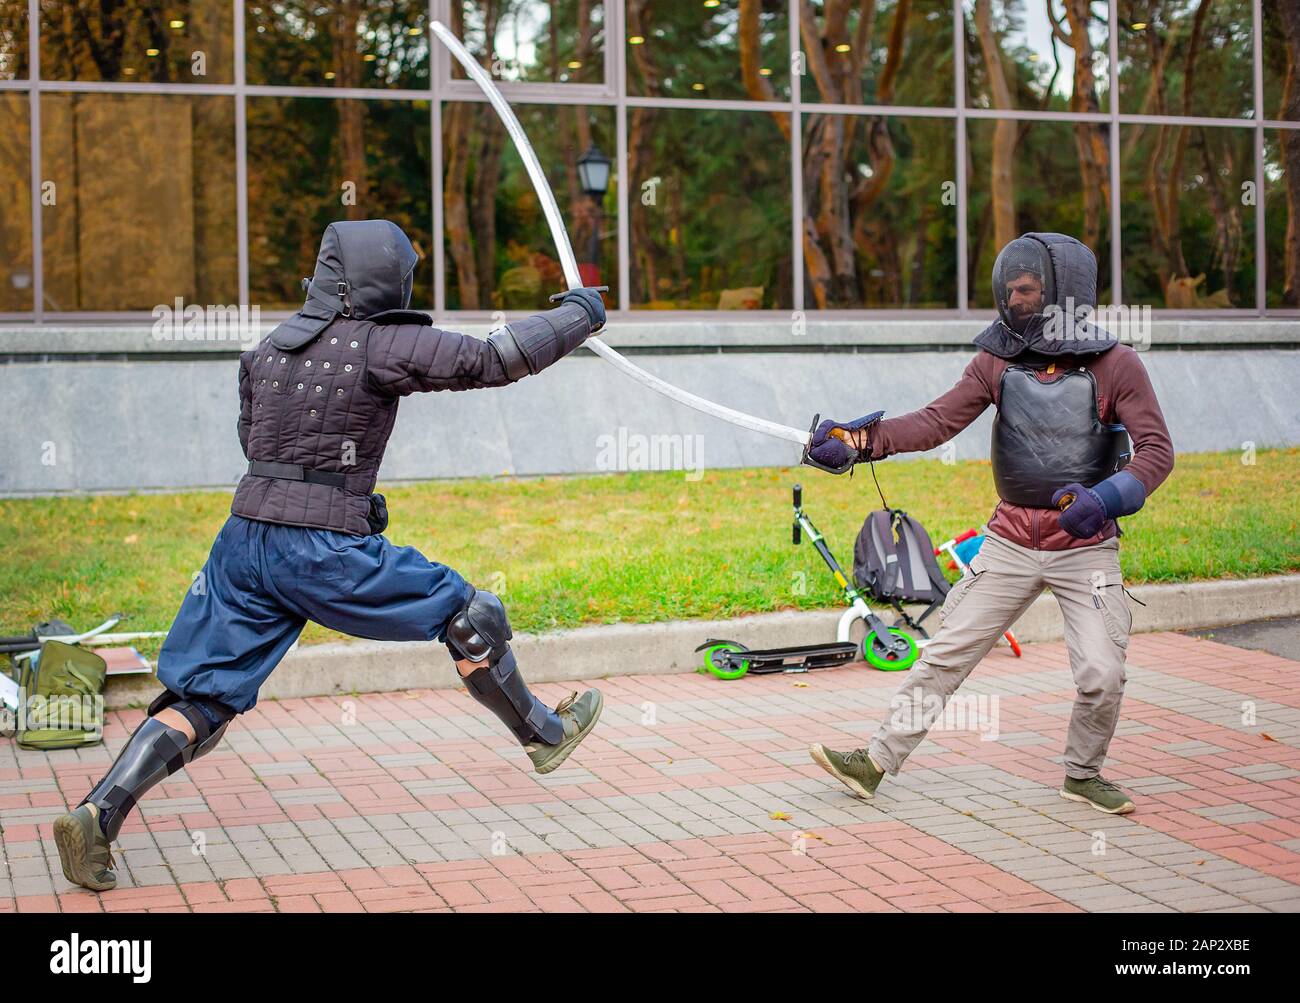 Two armed men lead a sword fight, a medieval fight, at a fun medieval tournament. Sports competitions. Gladiator fights. Stock Photo